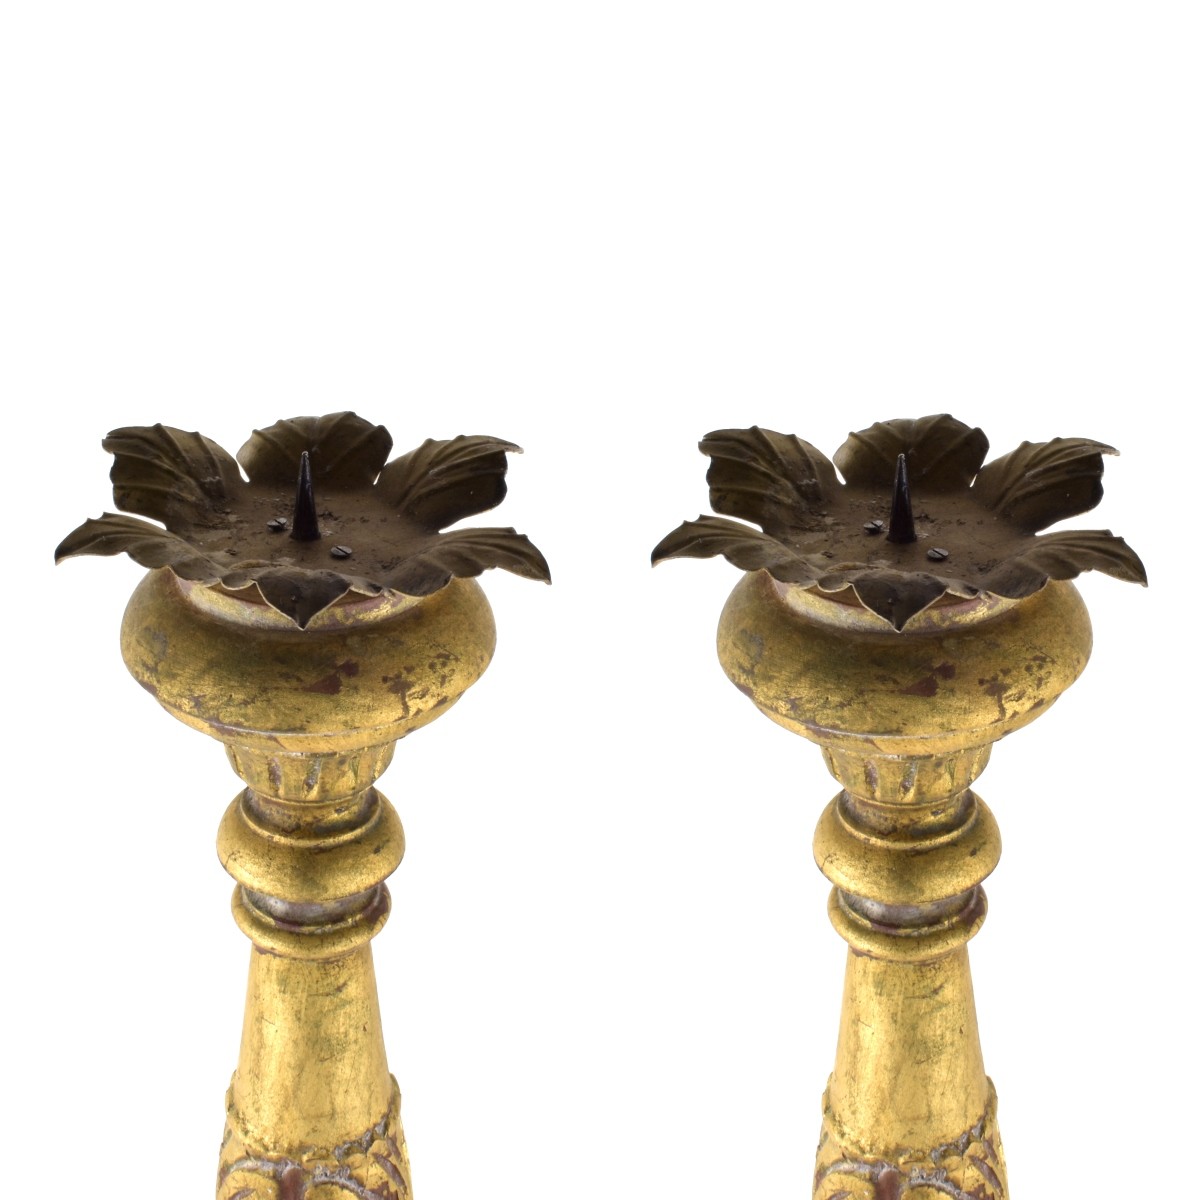 Pair of Large Continental Style Candlesticks